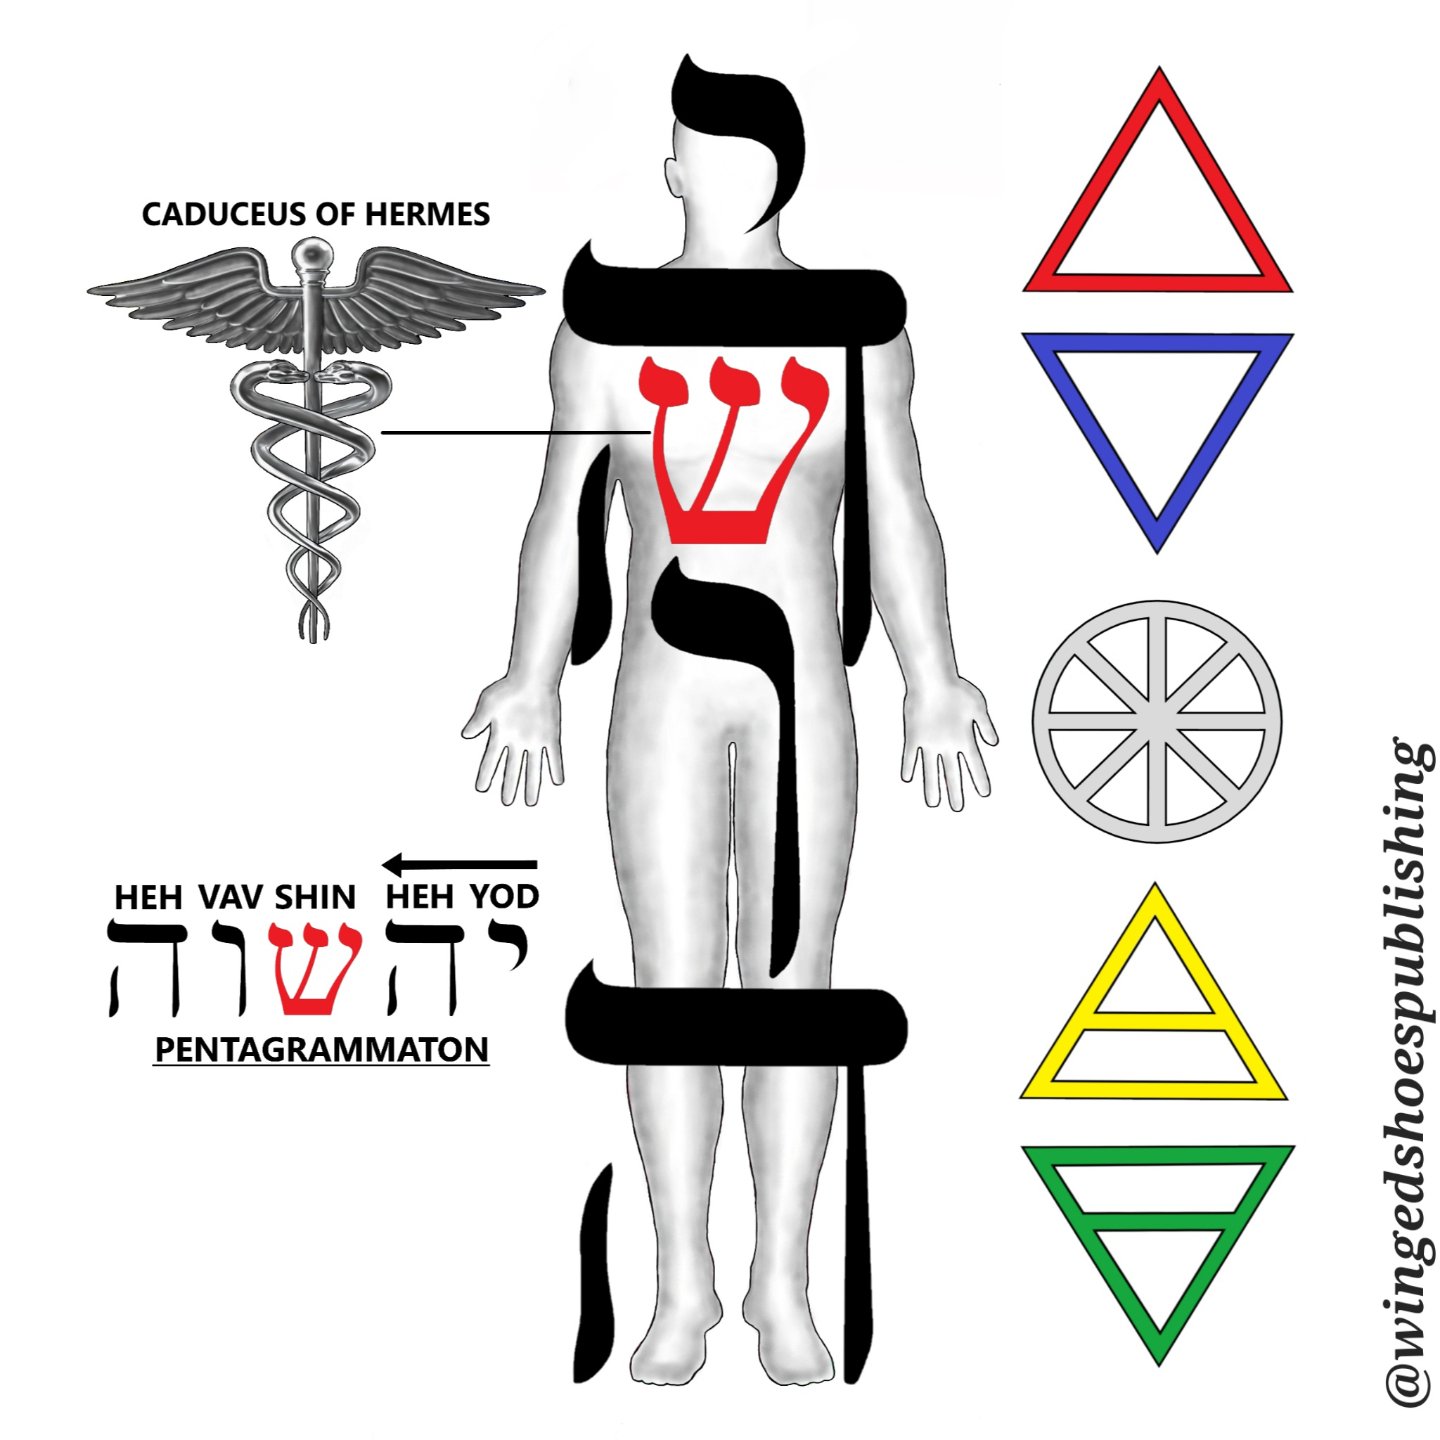 The Pentagrammaton (YHShinVH), meaning &quot;five letters,&quot; implies the integration of the symbolic Hebrew Letter Shin, referred to as the &quot;Three-Fold Flame of the Soul.&quot; Shin contains three strokes that visually resemble the three mai